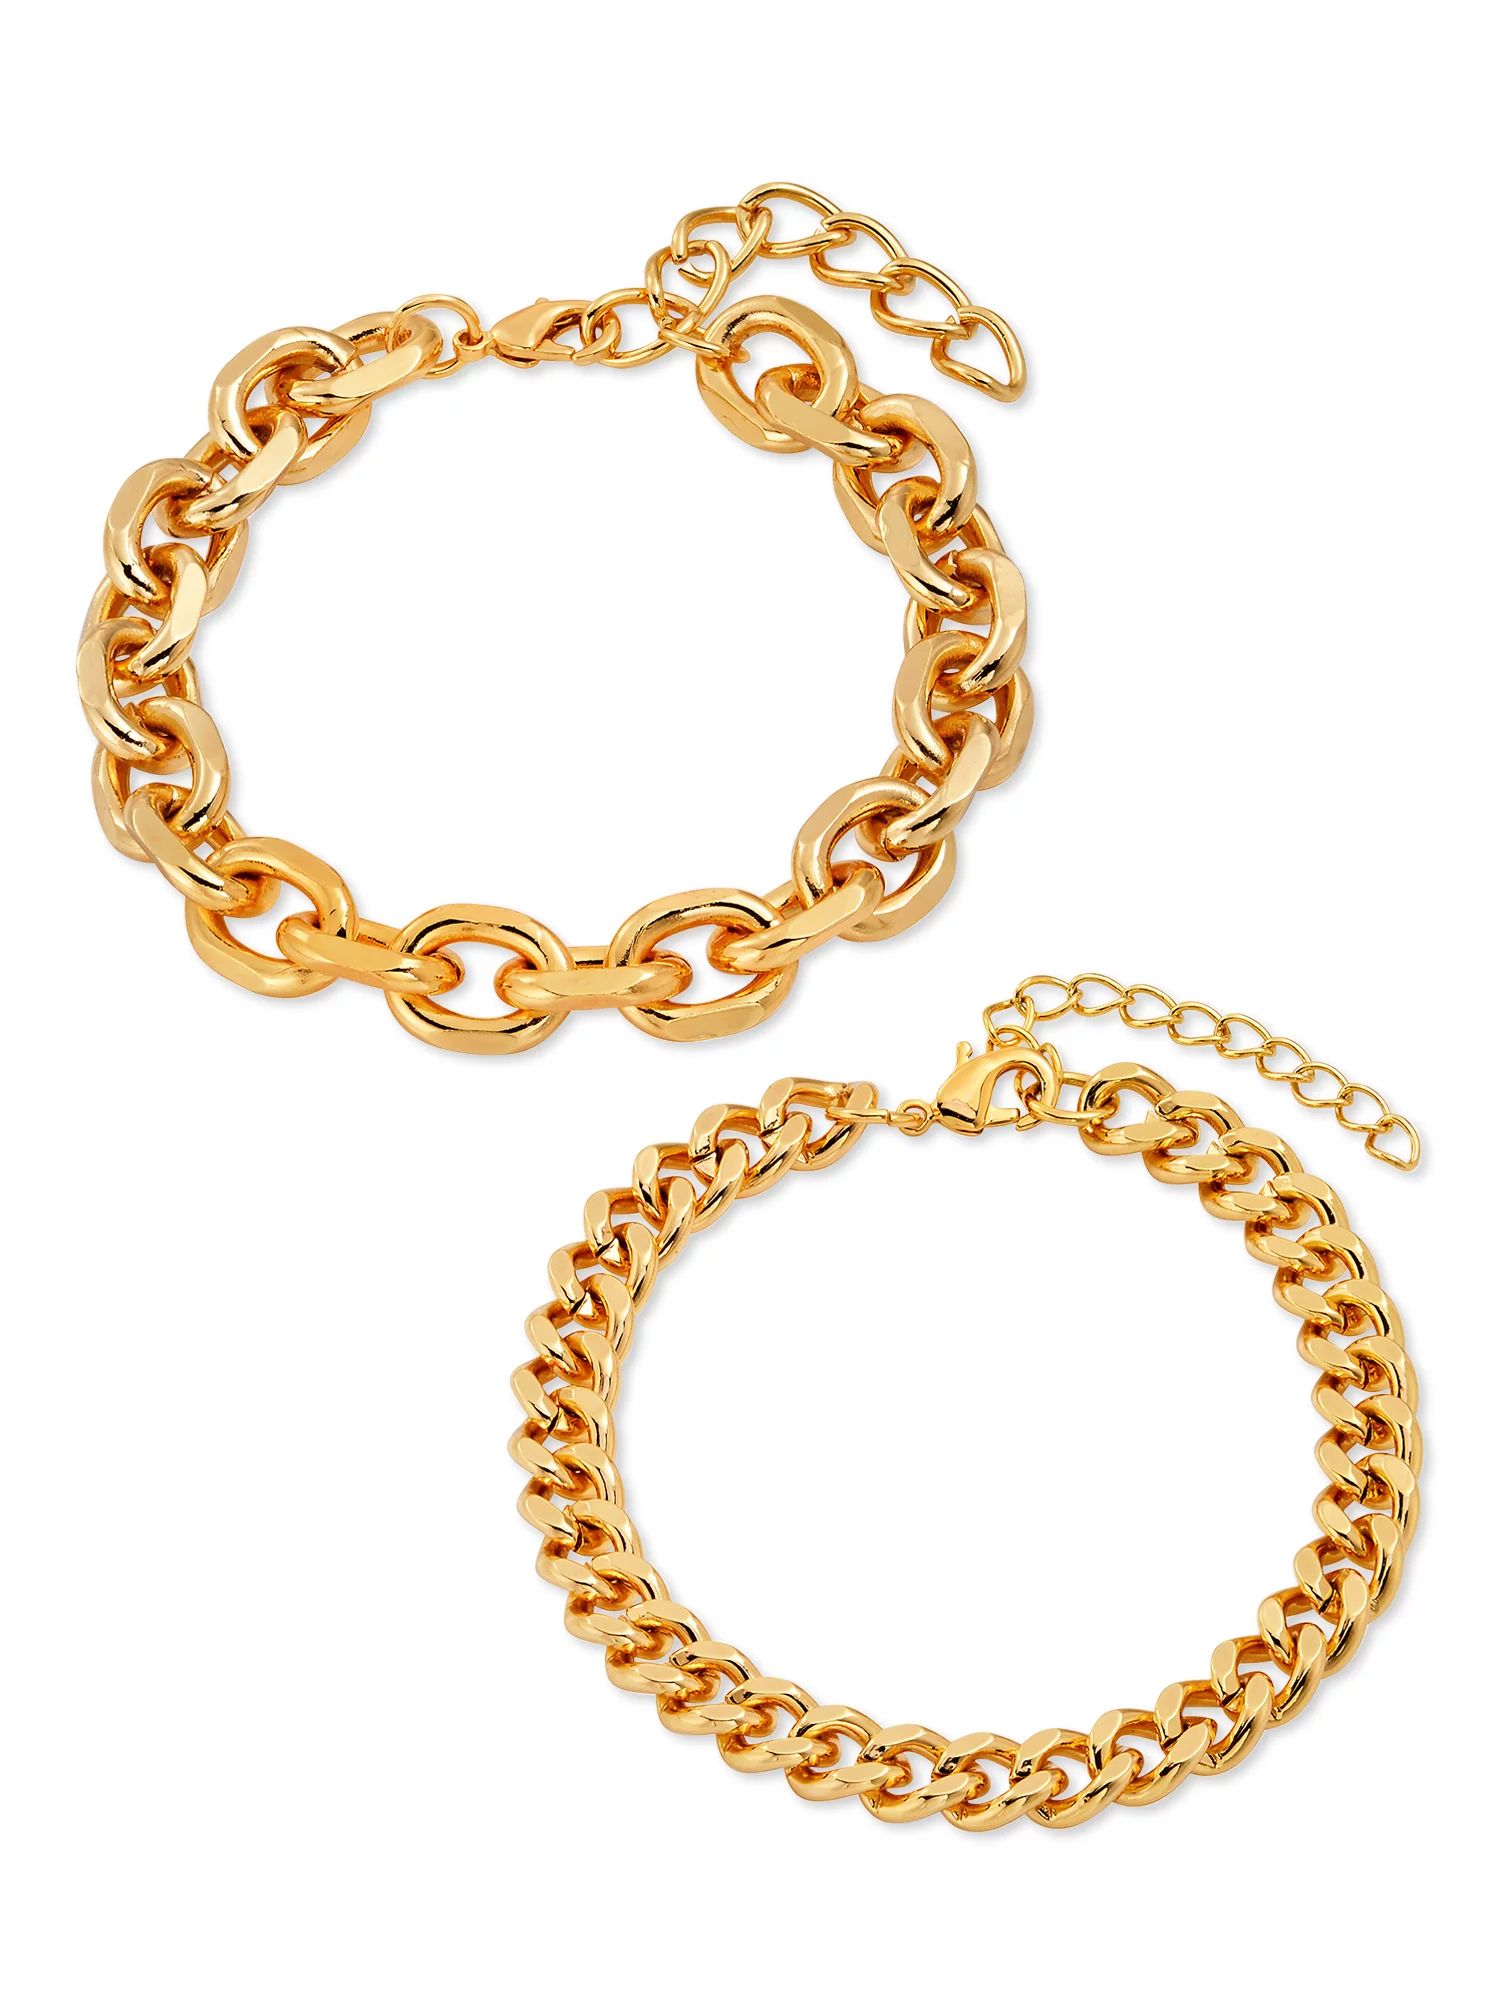 Scoop Womens Brass Yellow Gold-Plated Oval Link and Curb Chain Bracelets, 2-Piece Set | Walmart (US)